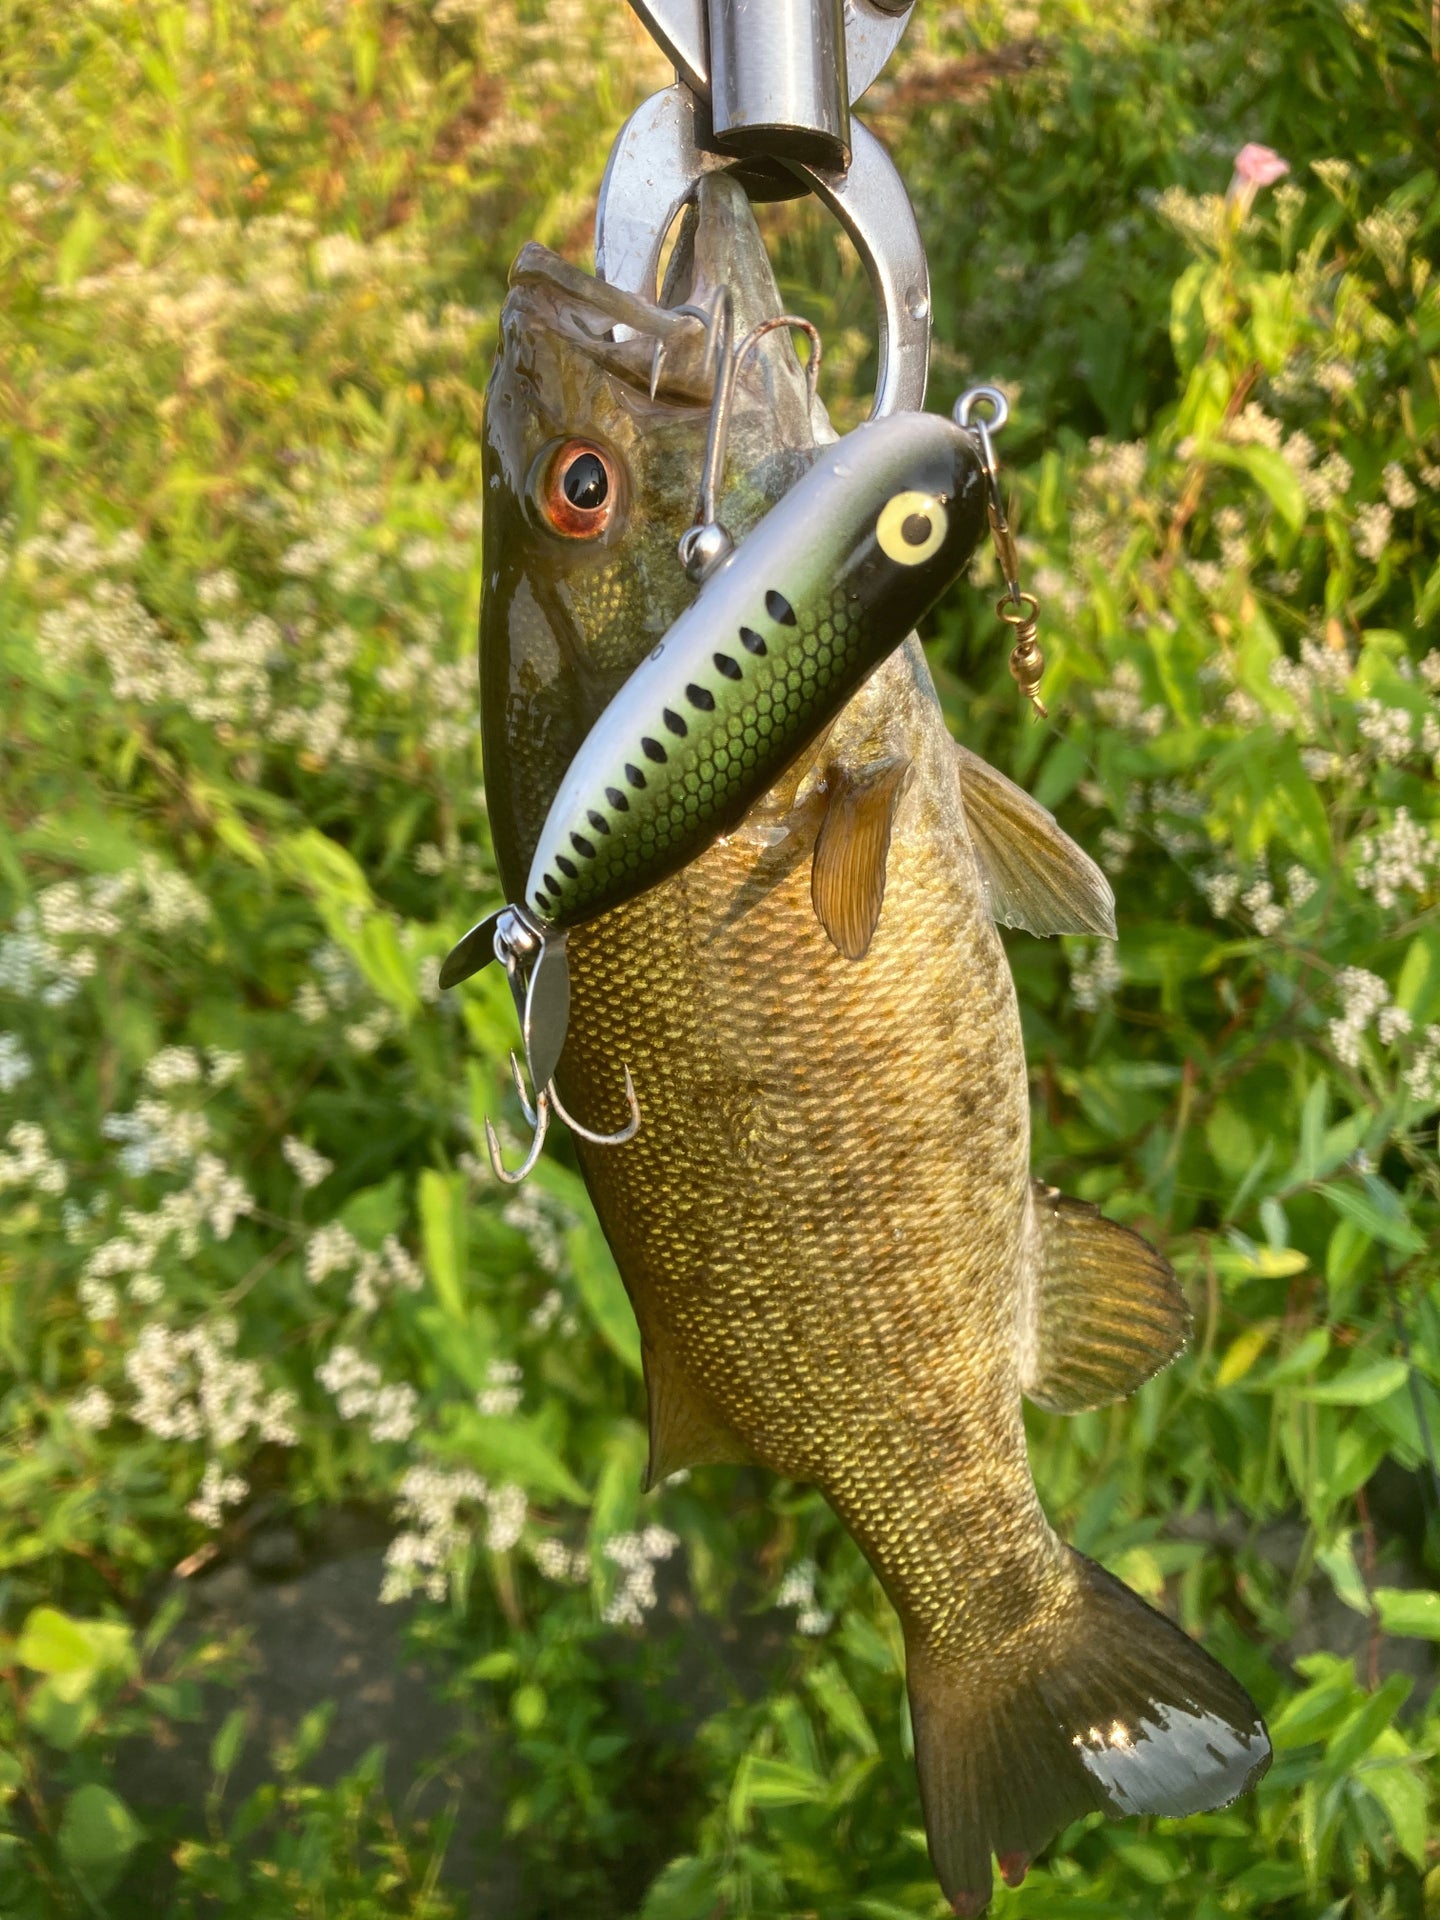 Success on a topwater I haven't tried before, plus a Fox River largemouth